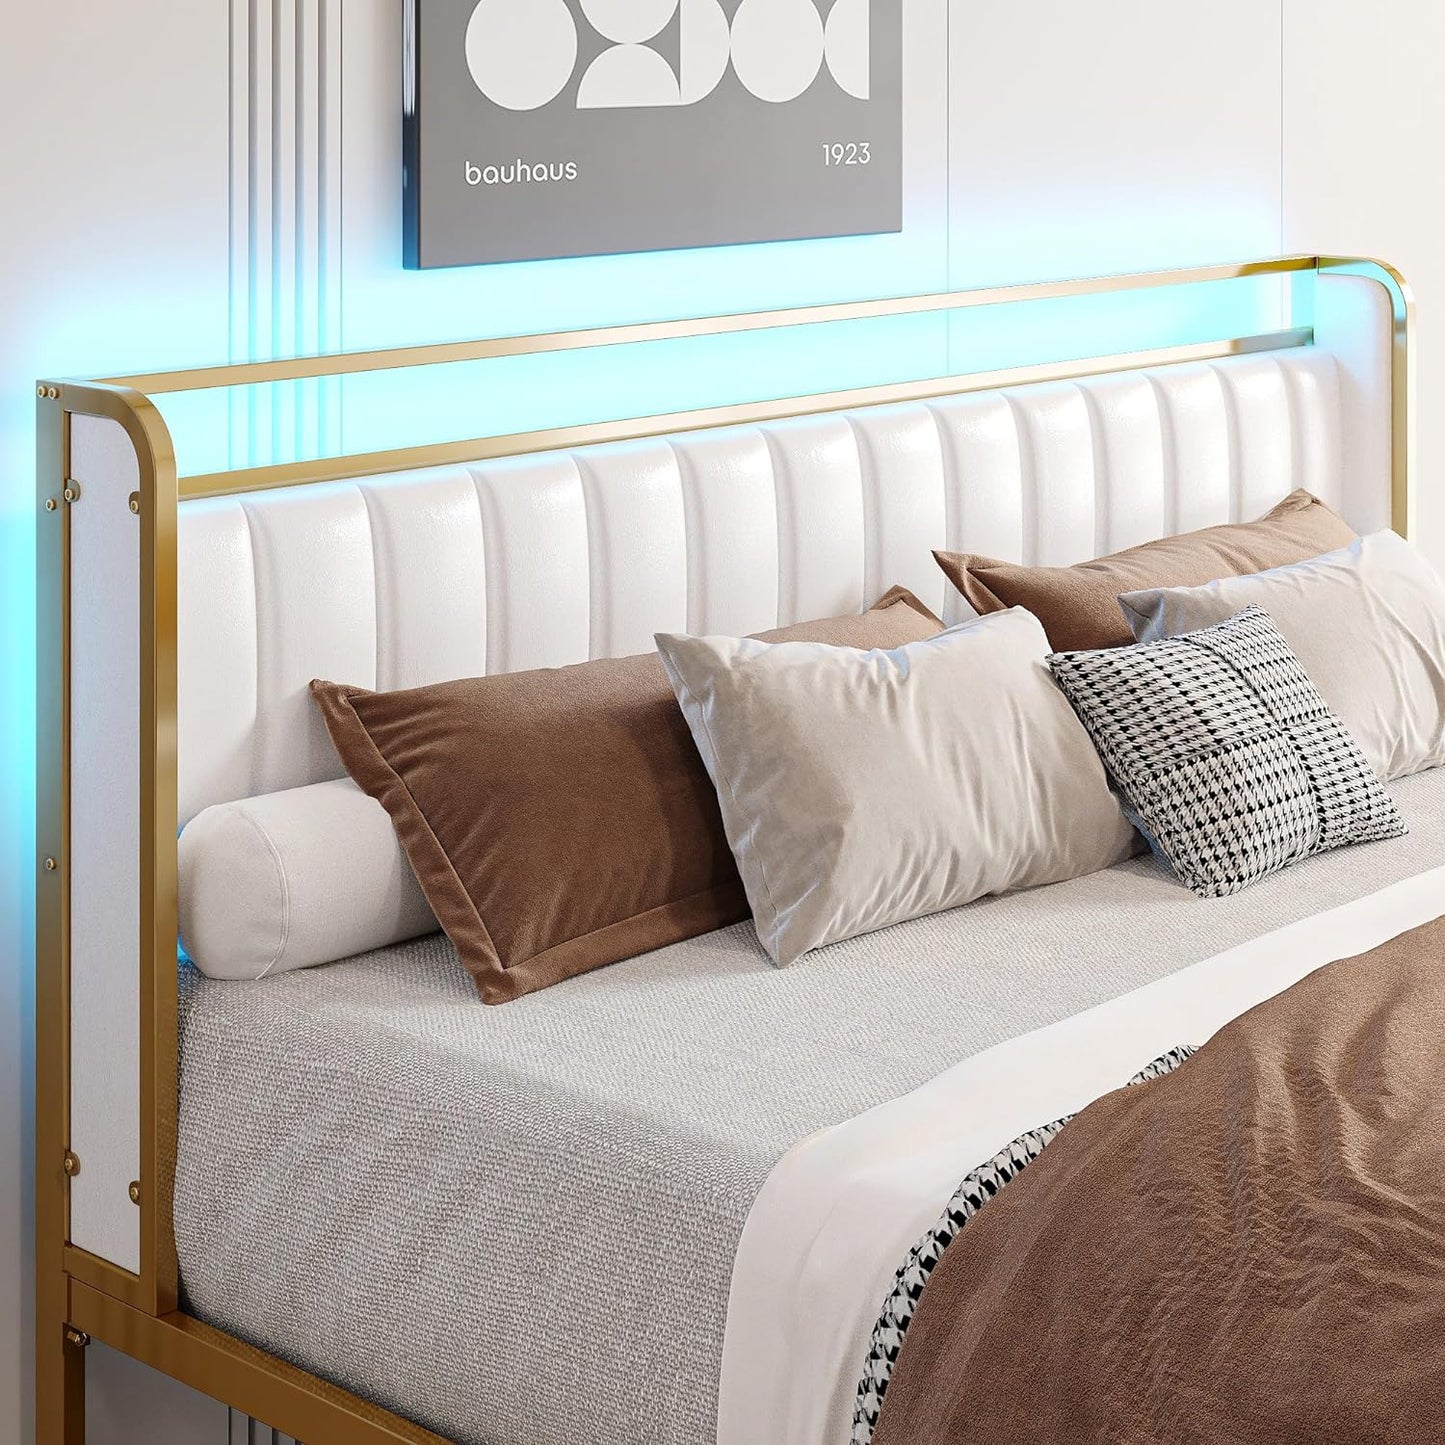 White Modern Upholstered Bed Platform with Drawers